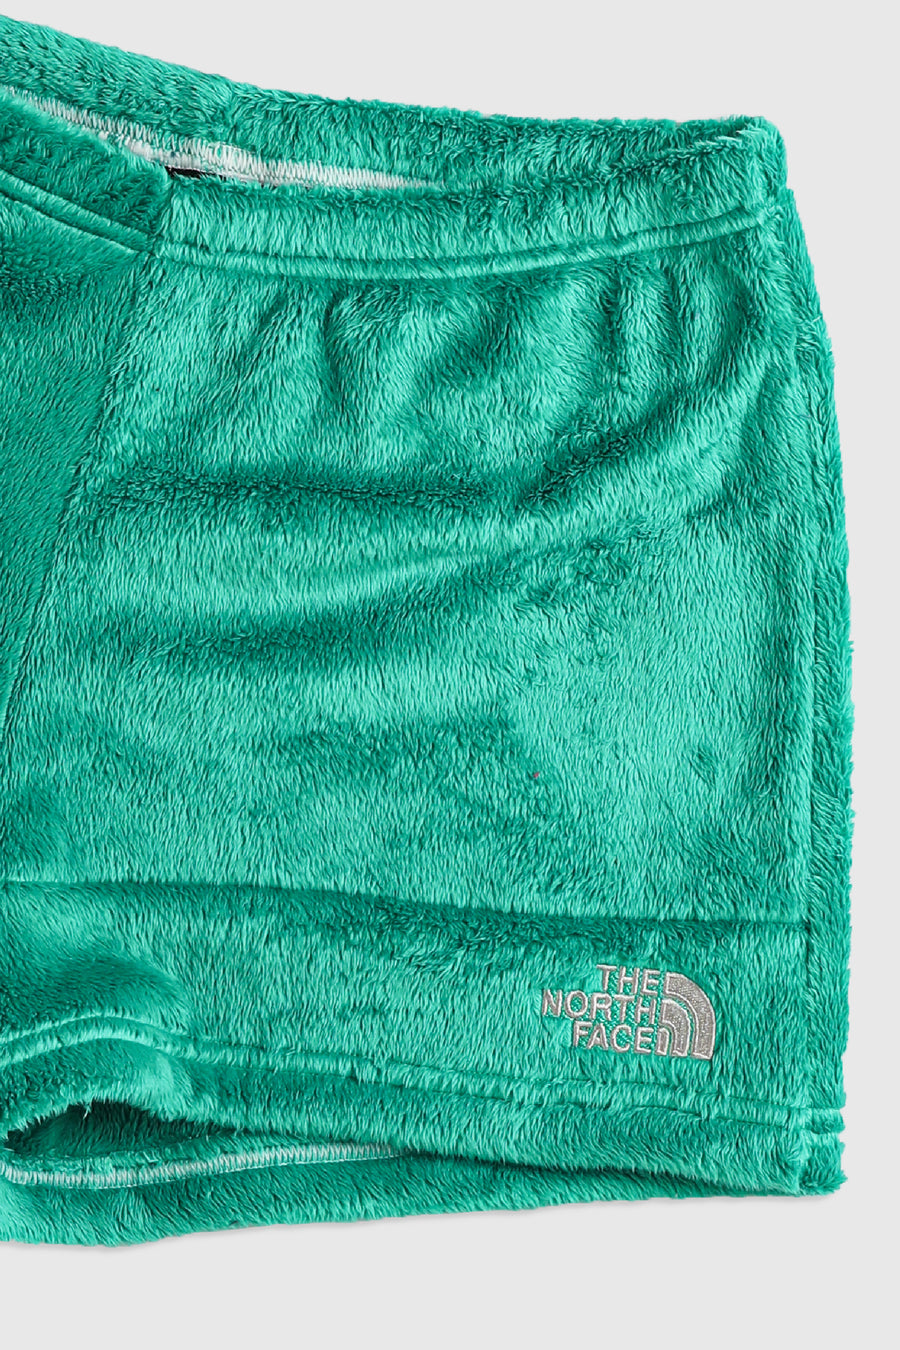 Rework North Face Fuzzy Shorts - S, M